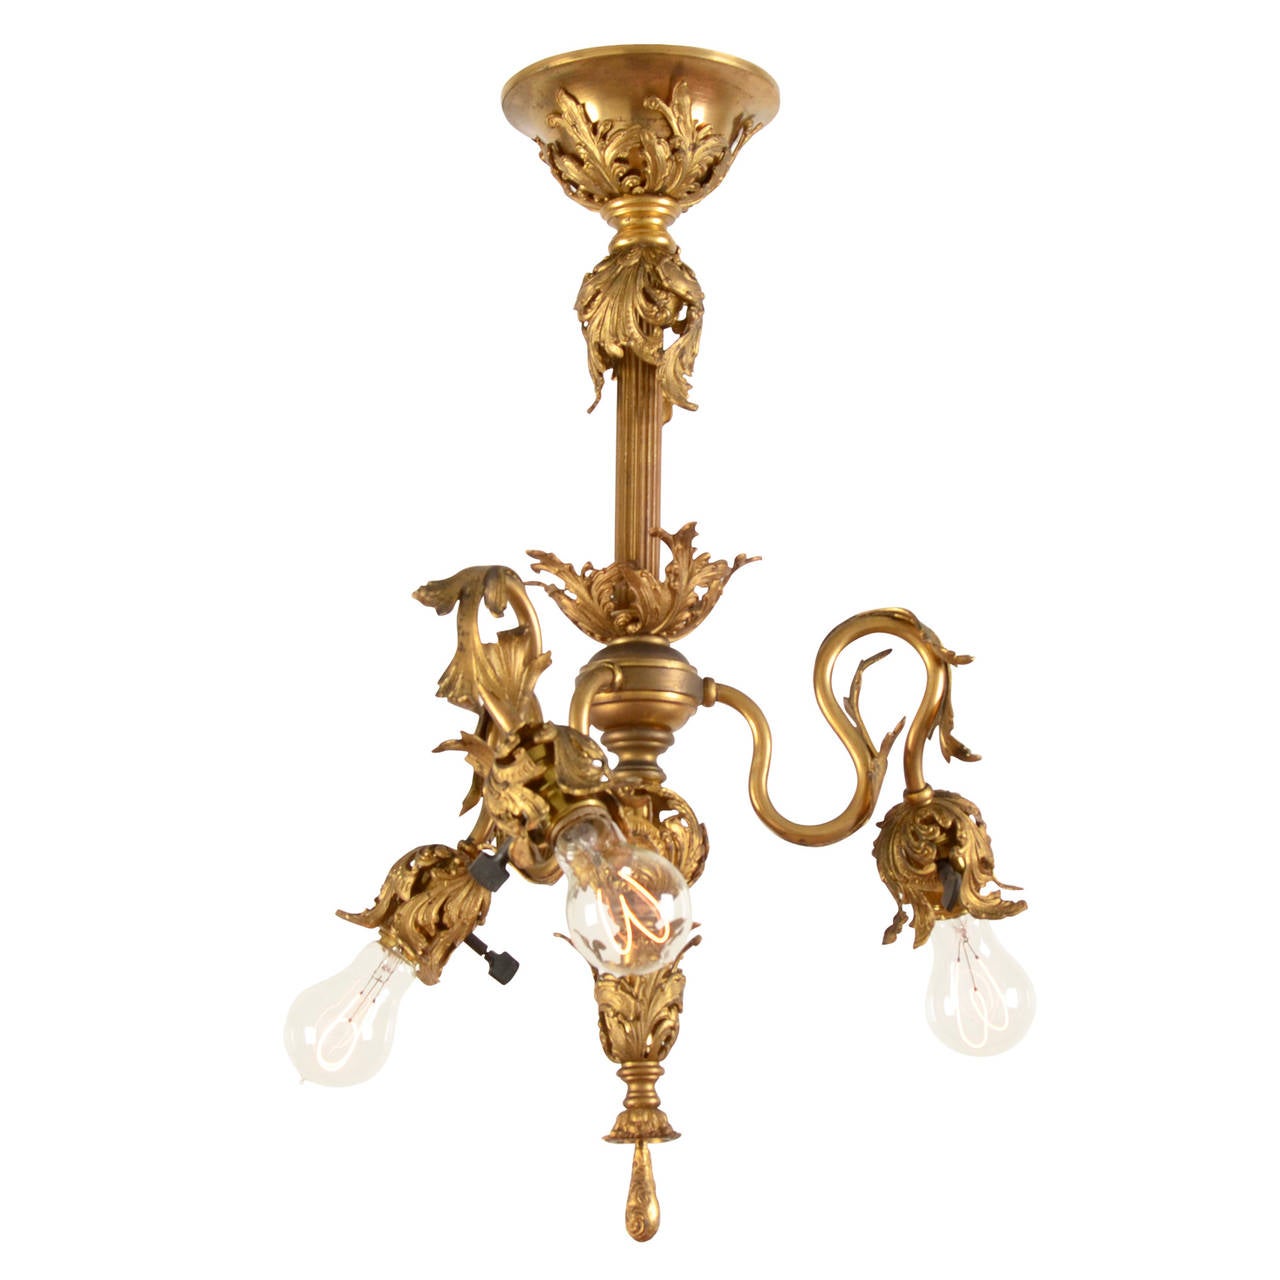 It was love at first sight when we laid eyes on this stunning gilt Rococo fin de siècle chandelier. Complete with original 'round sausage key' GE light sockets, this incredible piece features its original fire gilt finish, which carries the kind of